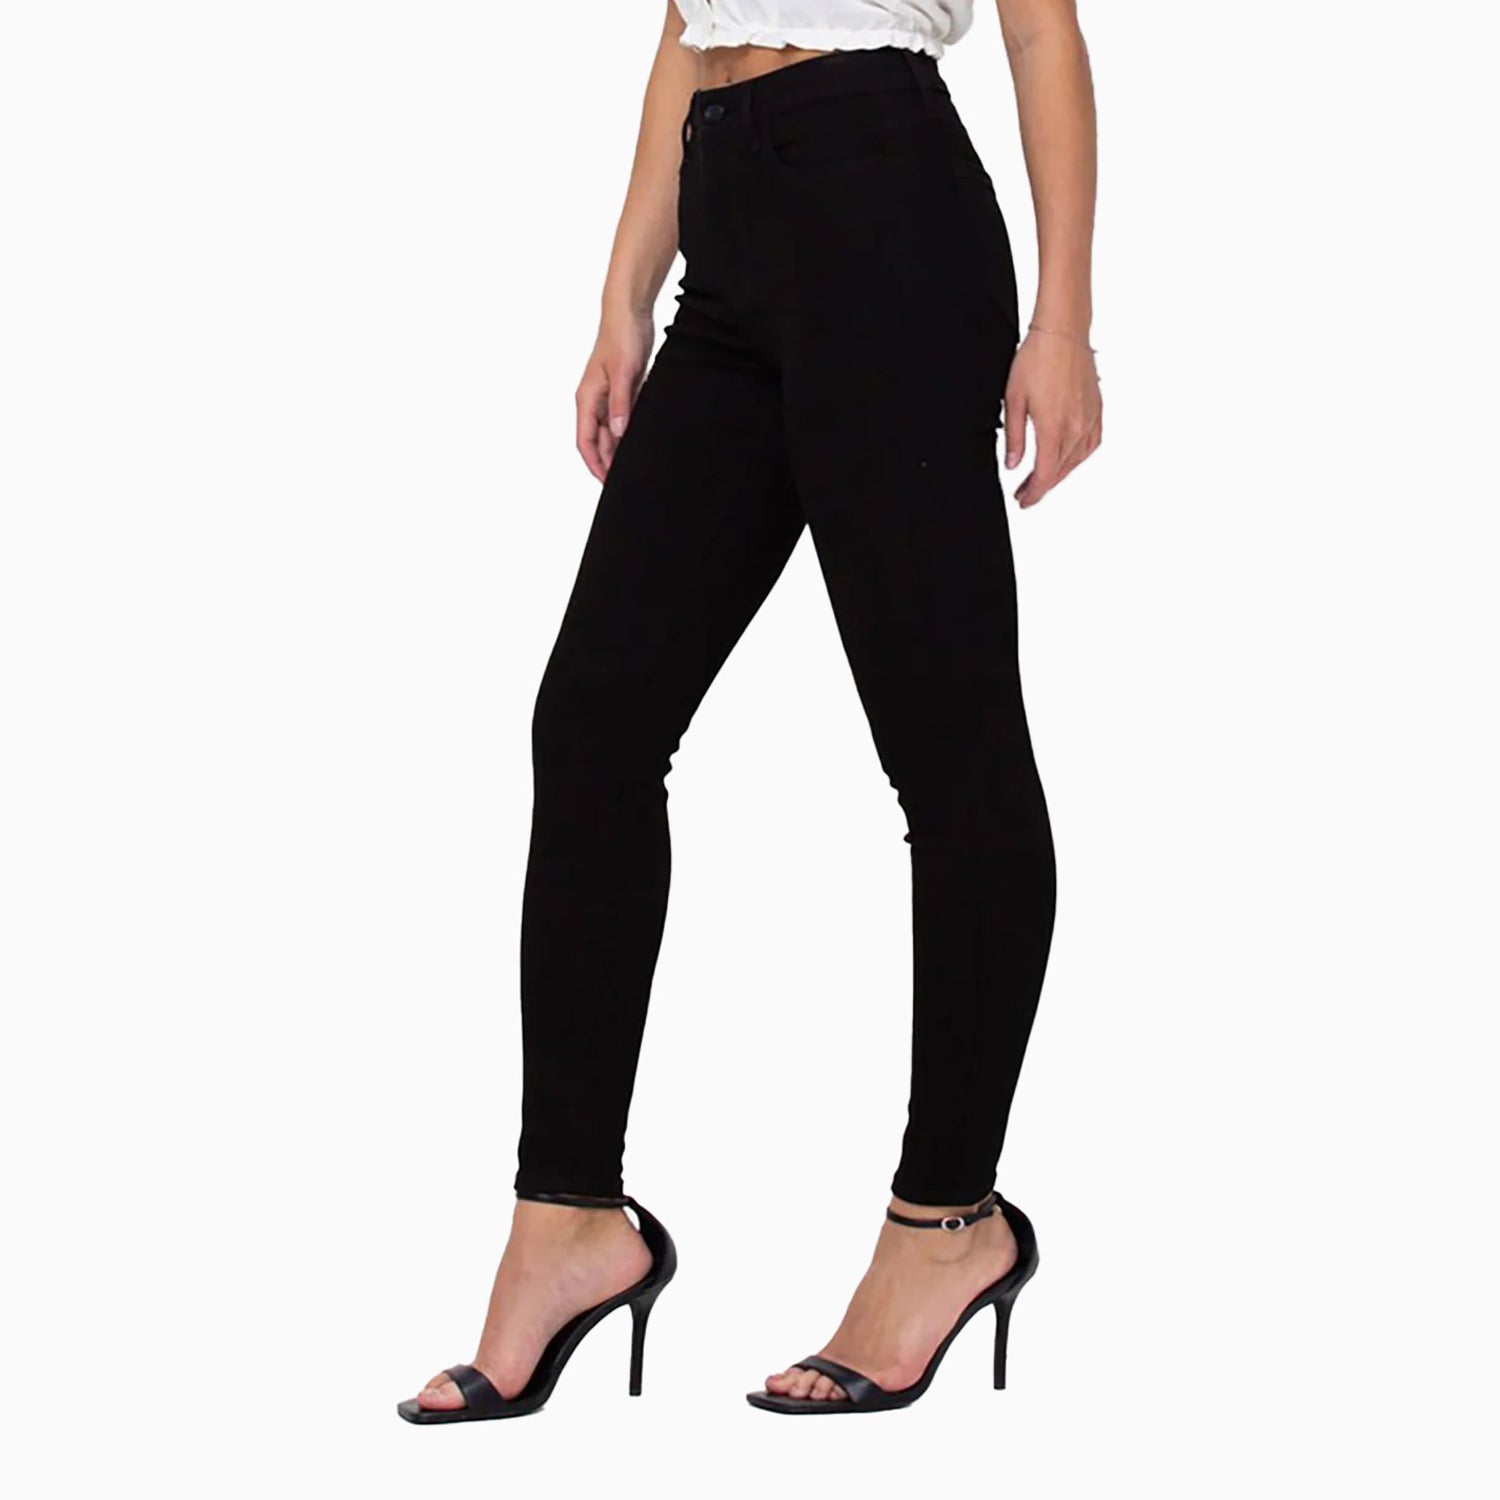 cello-jeans-womens-high-rise-ankle-skinny-pant-wv17594blk2